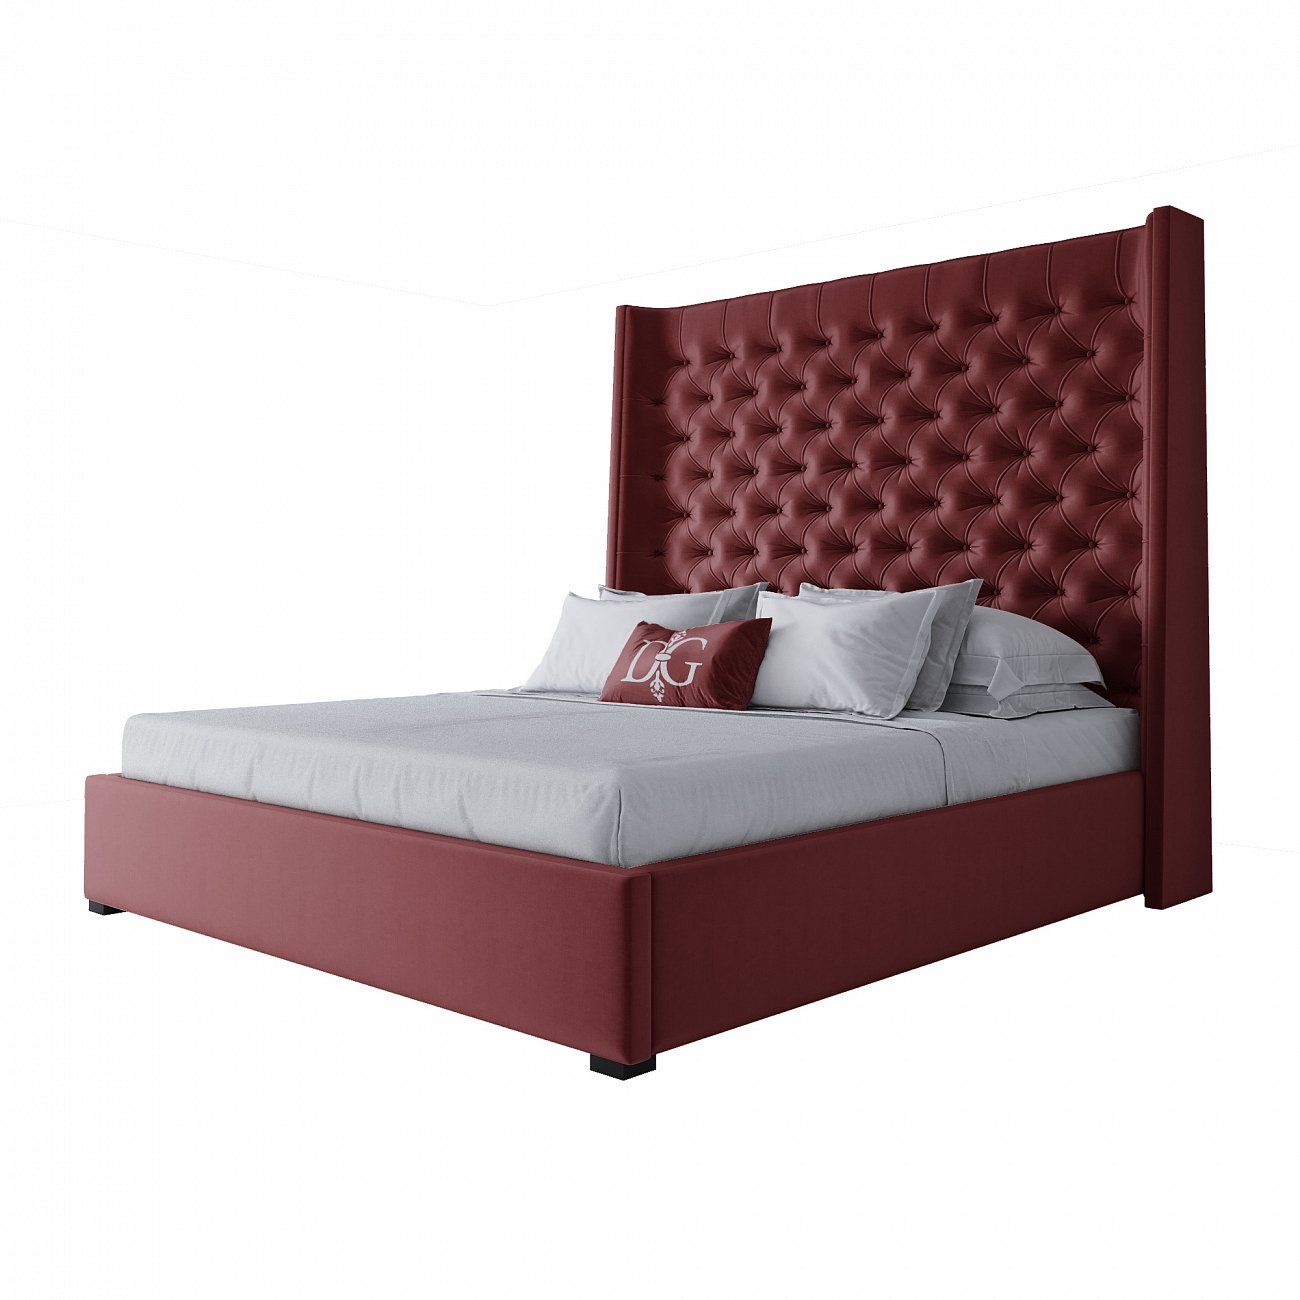 Double bed with upholstered headboard 180x200 cm red Jackie King